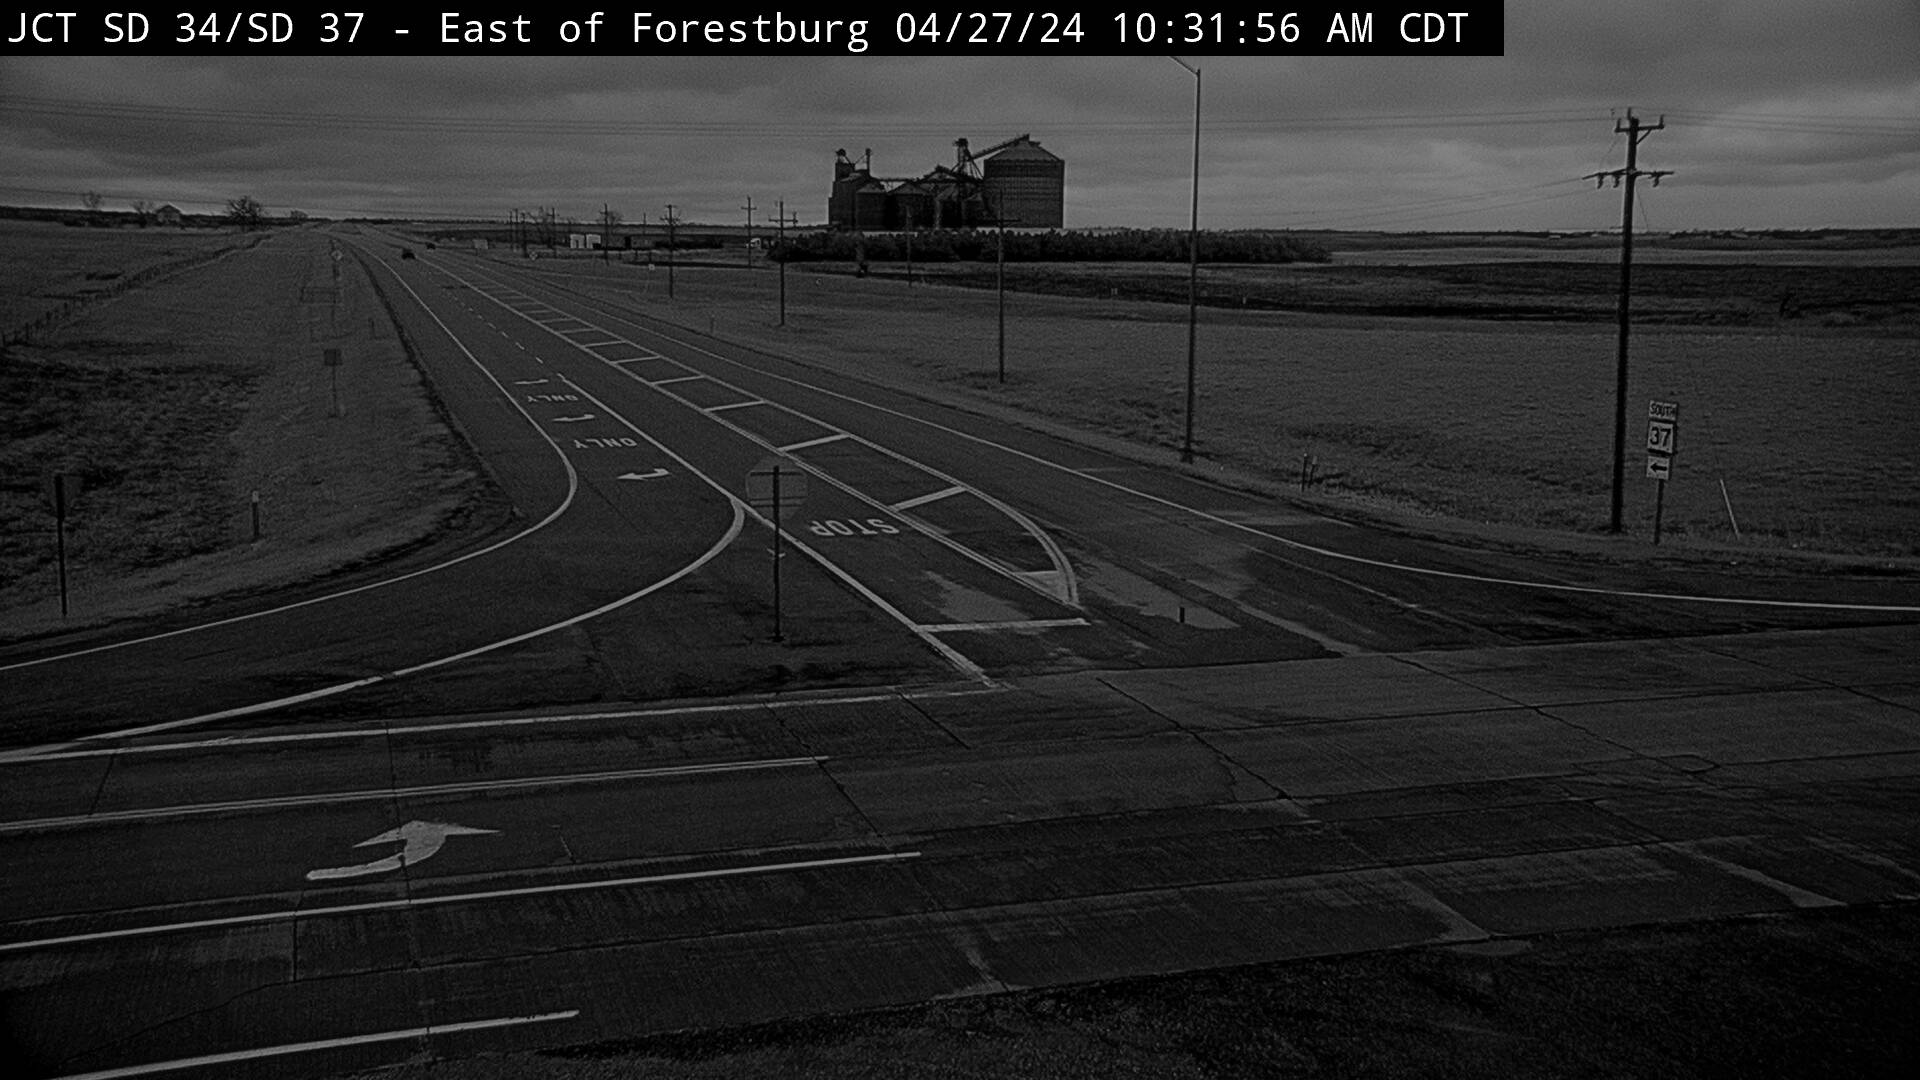 Traffic Cam East of town at junction SD-34 & SD-37 - South Player